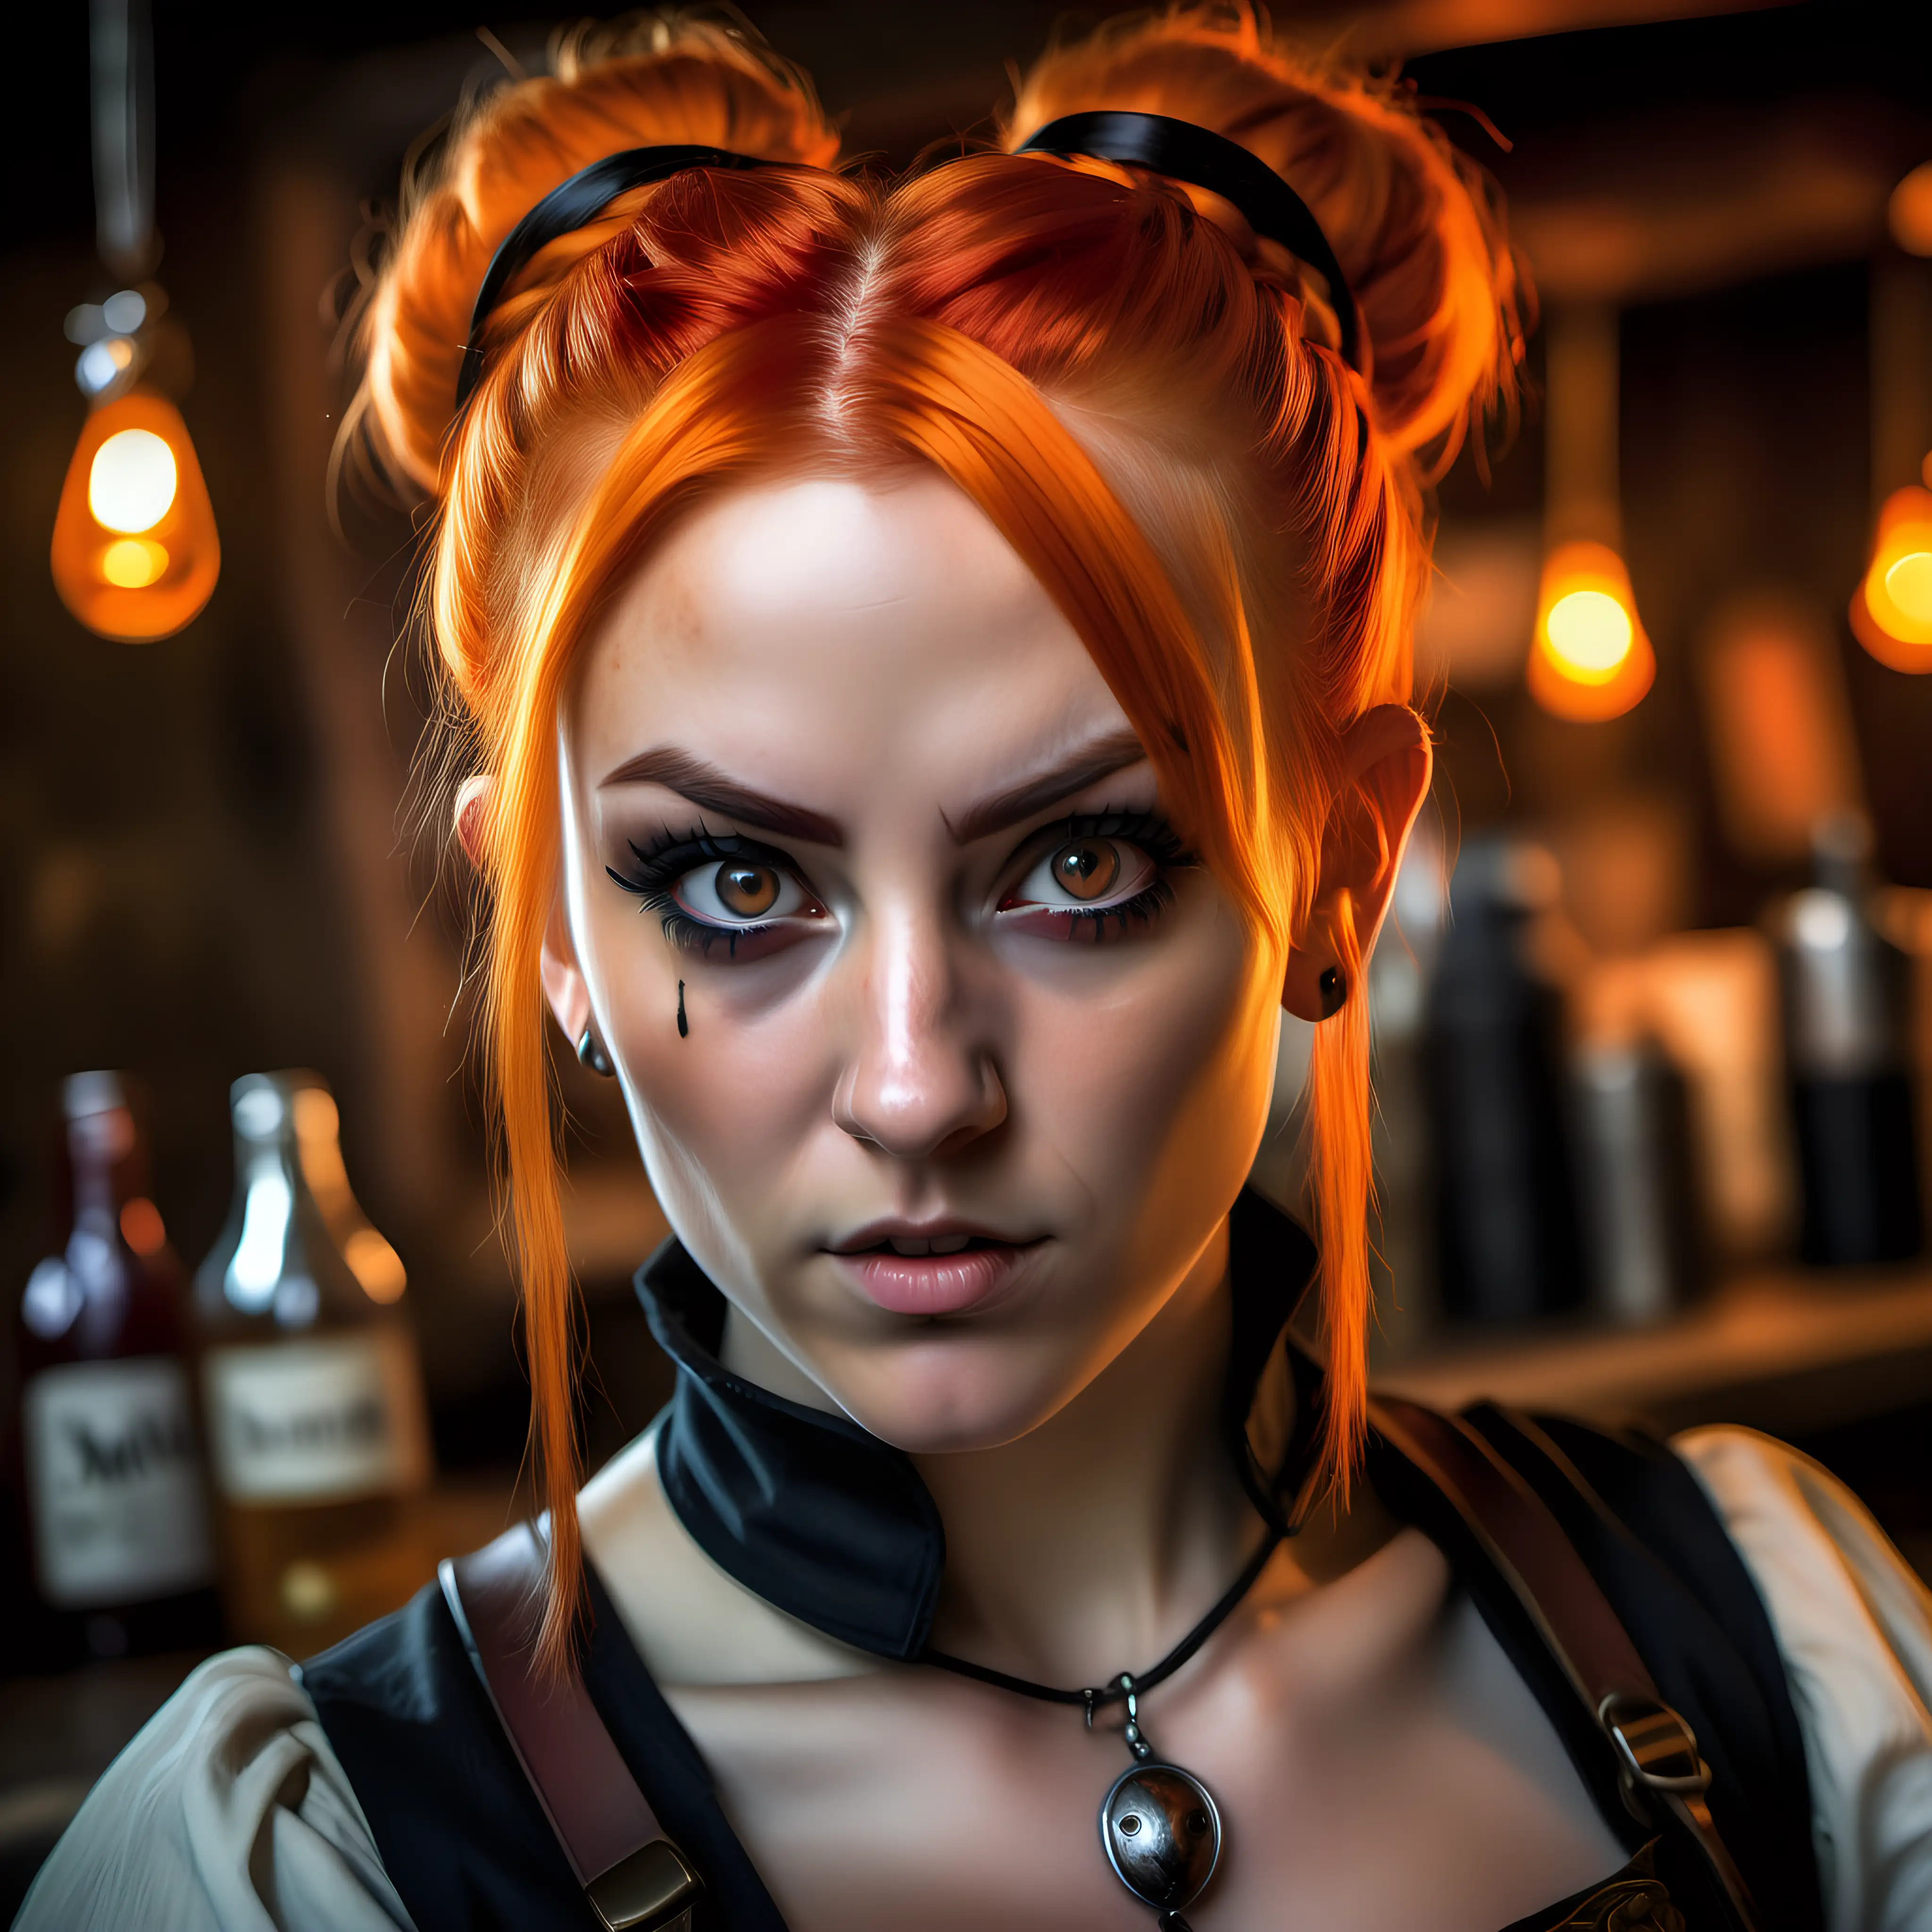 female rogue, expression of wonder, cute, strong, amulet necklace, small stud earrings, bright orange hair in a tight bun, detailed eyes, detailed face, bartending, medieval fantasy, small tavern, super detailed, hyper realistic photography, head shot, face only, extreme closeup